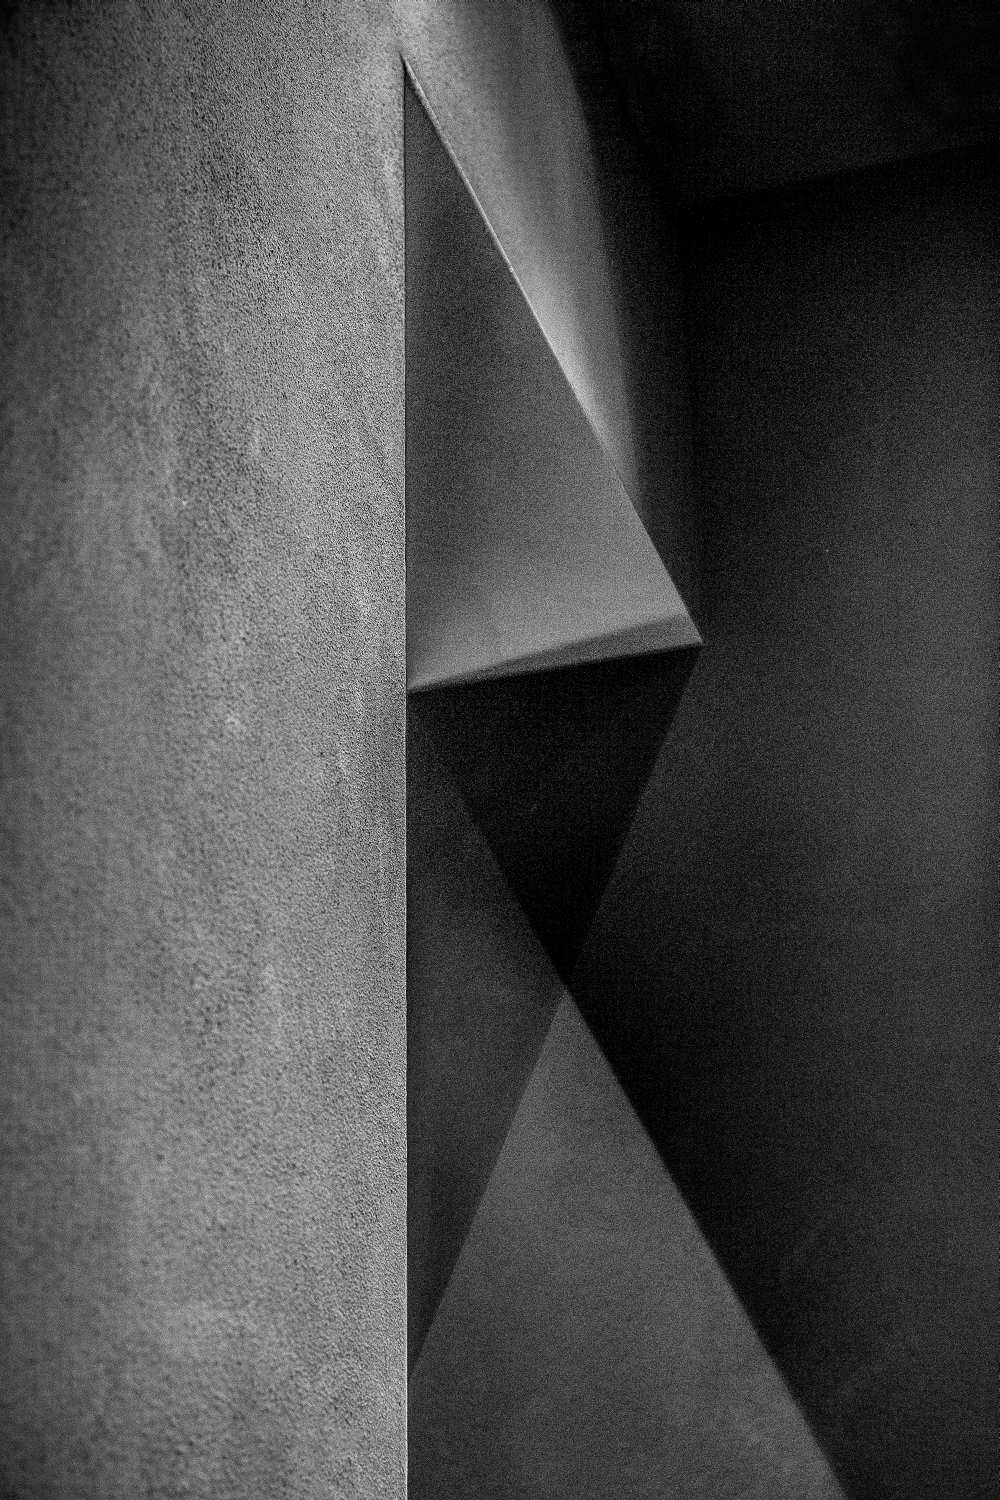 Grey shadows from Inge Schuster